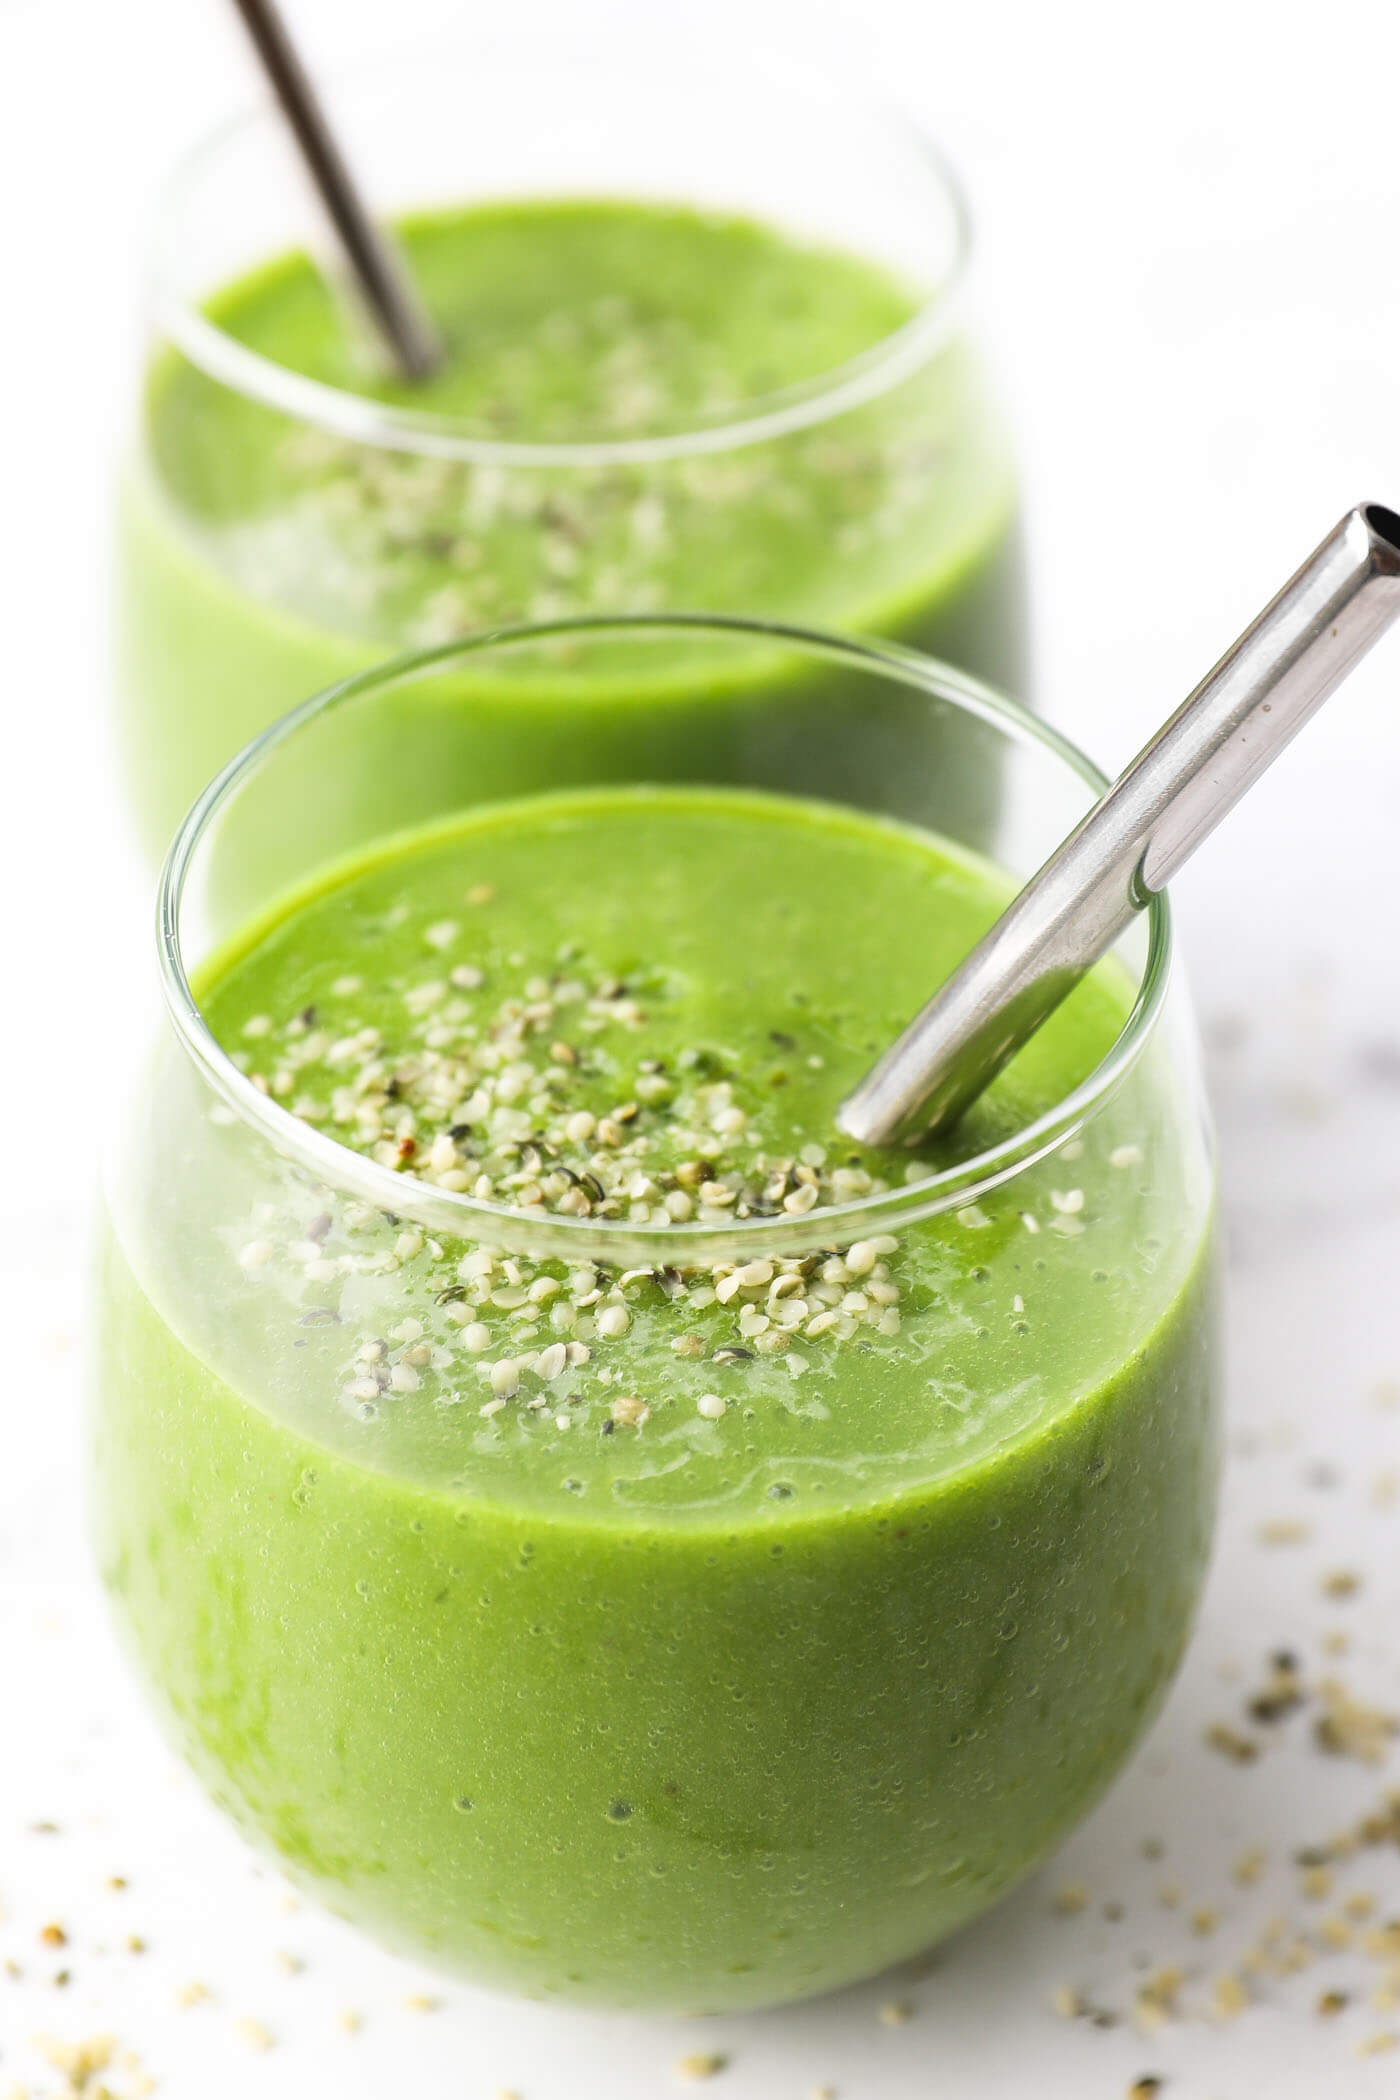 Two glasses of a spinach smoothie with straws in the glasses and hempseeds sprinkled on top.